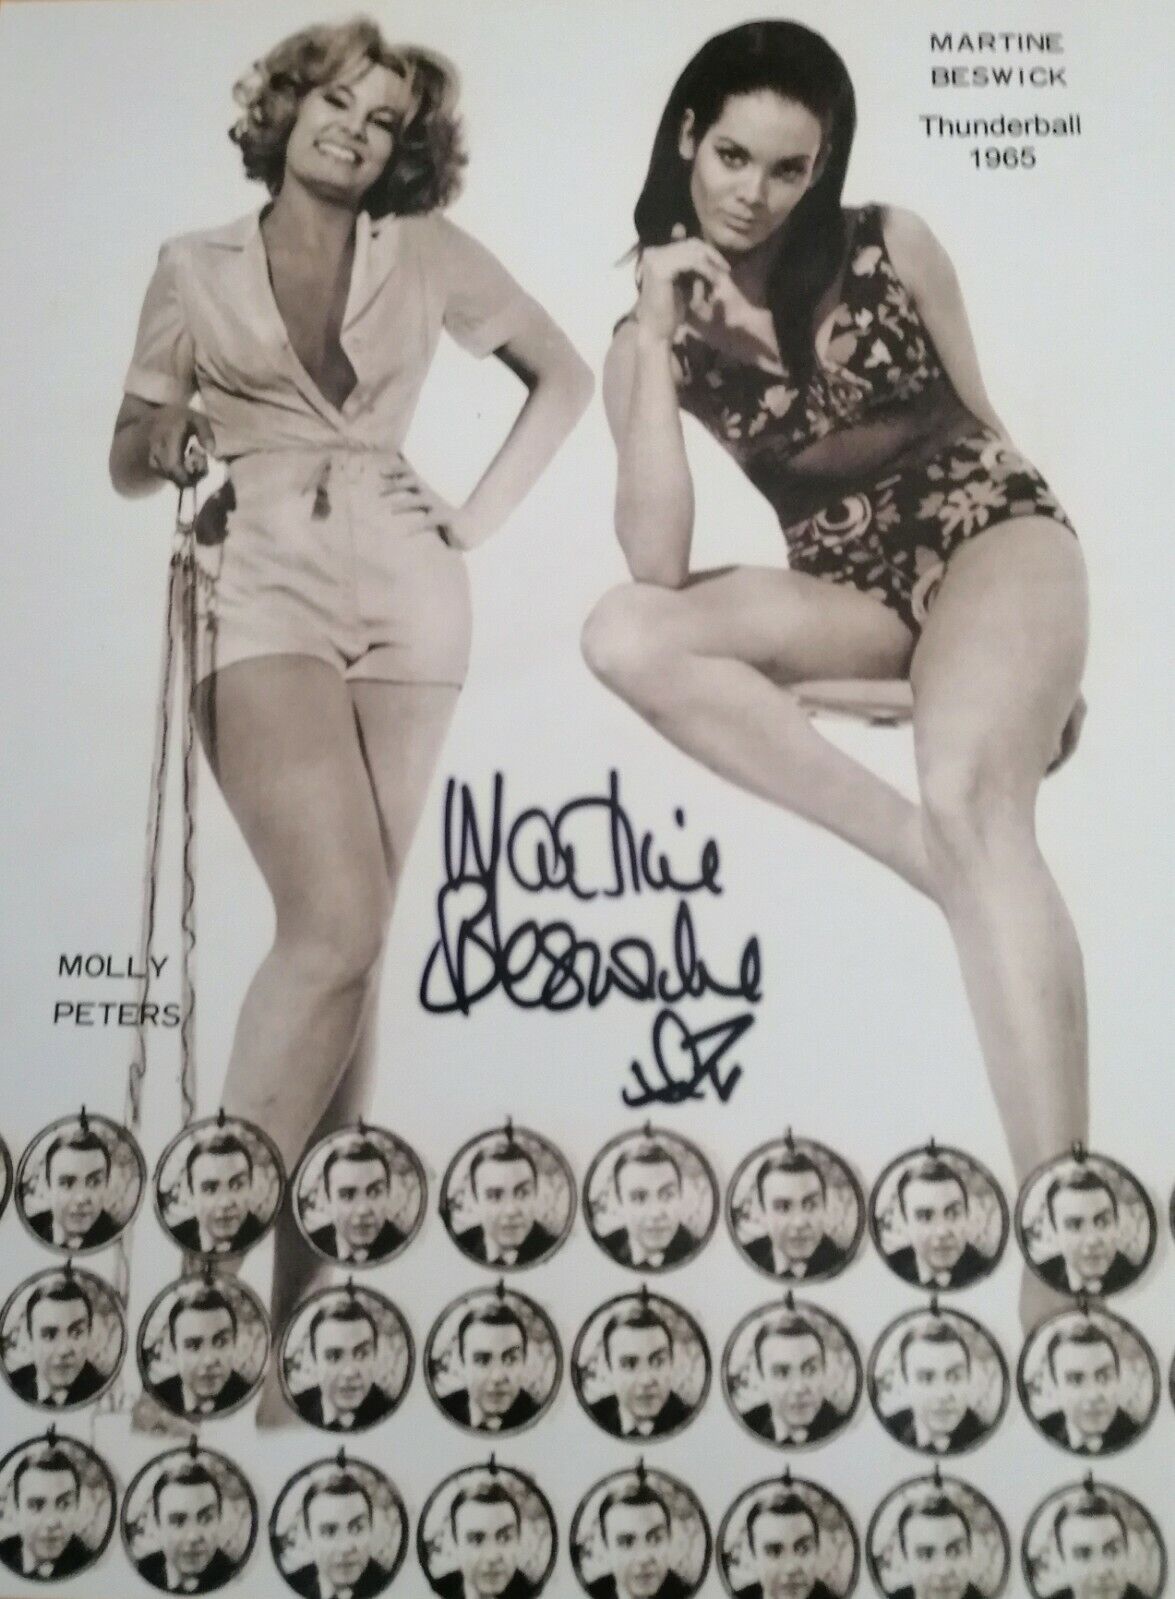 Martine Beswick SIGNED 1965 Film Thunderball GENUINE B x W Autographed Photo Poster painting